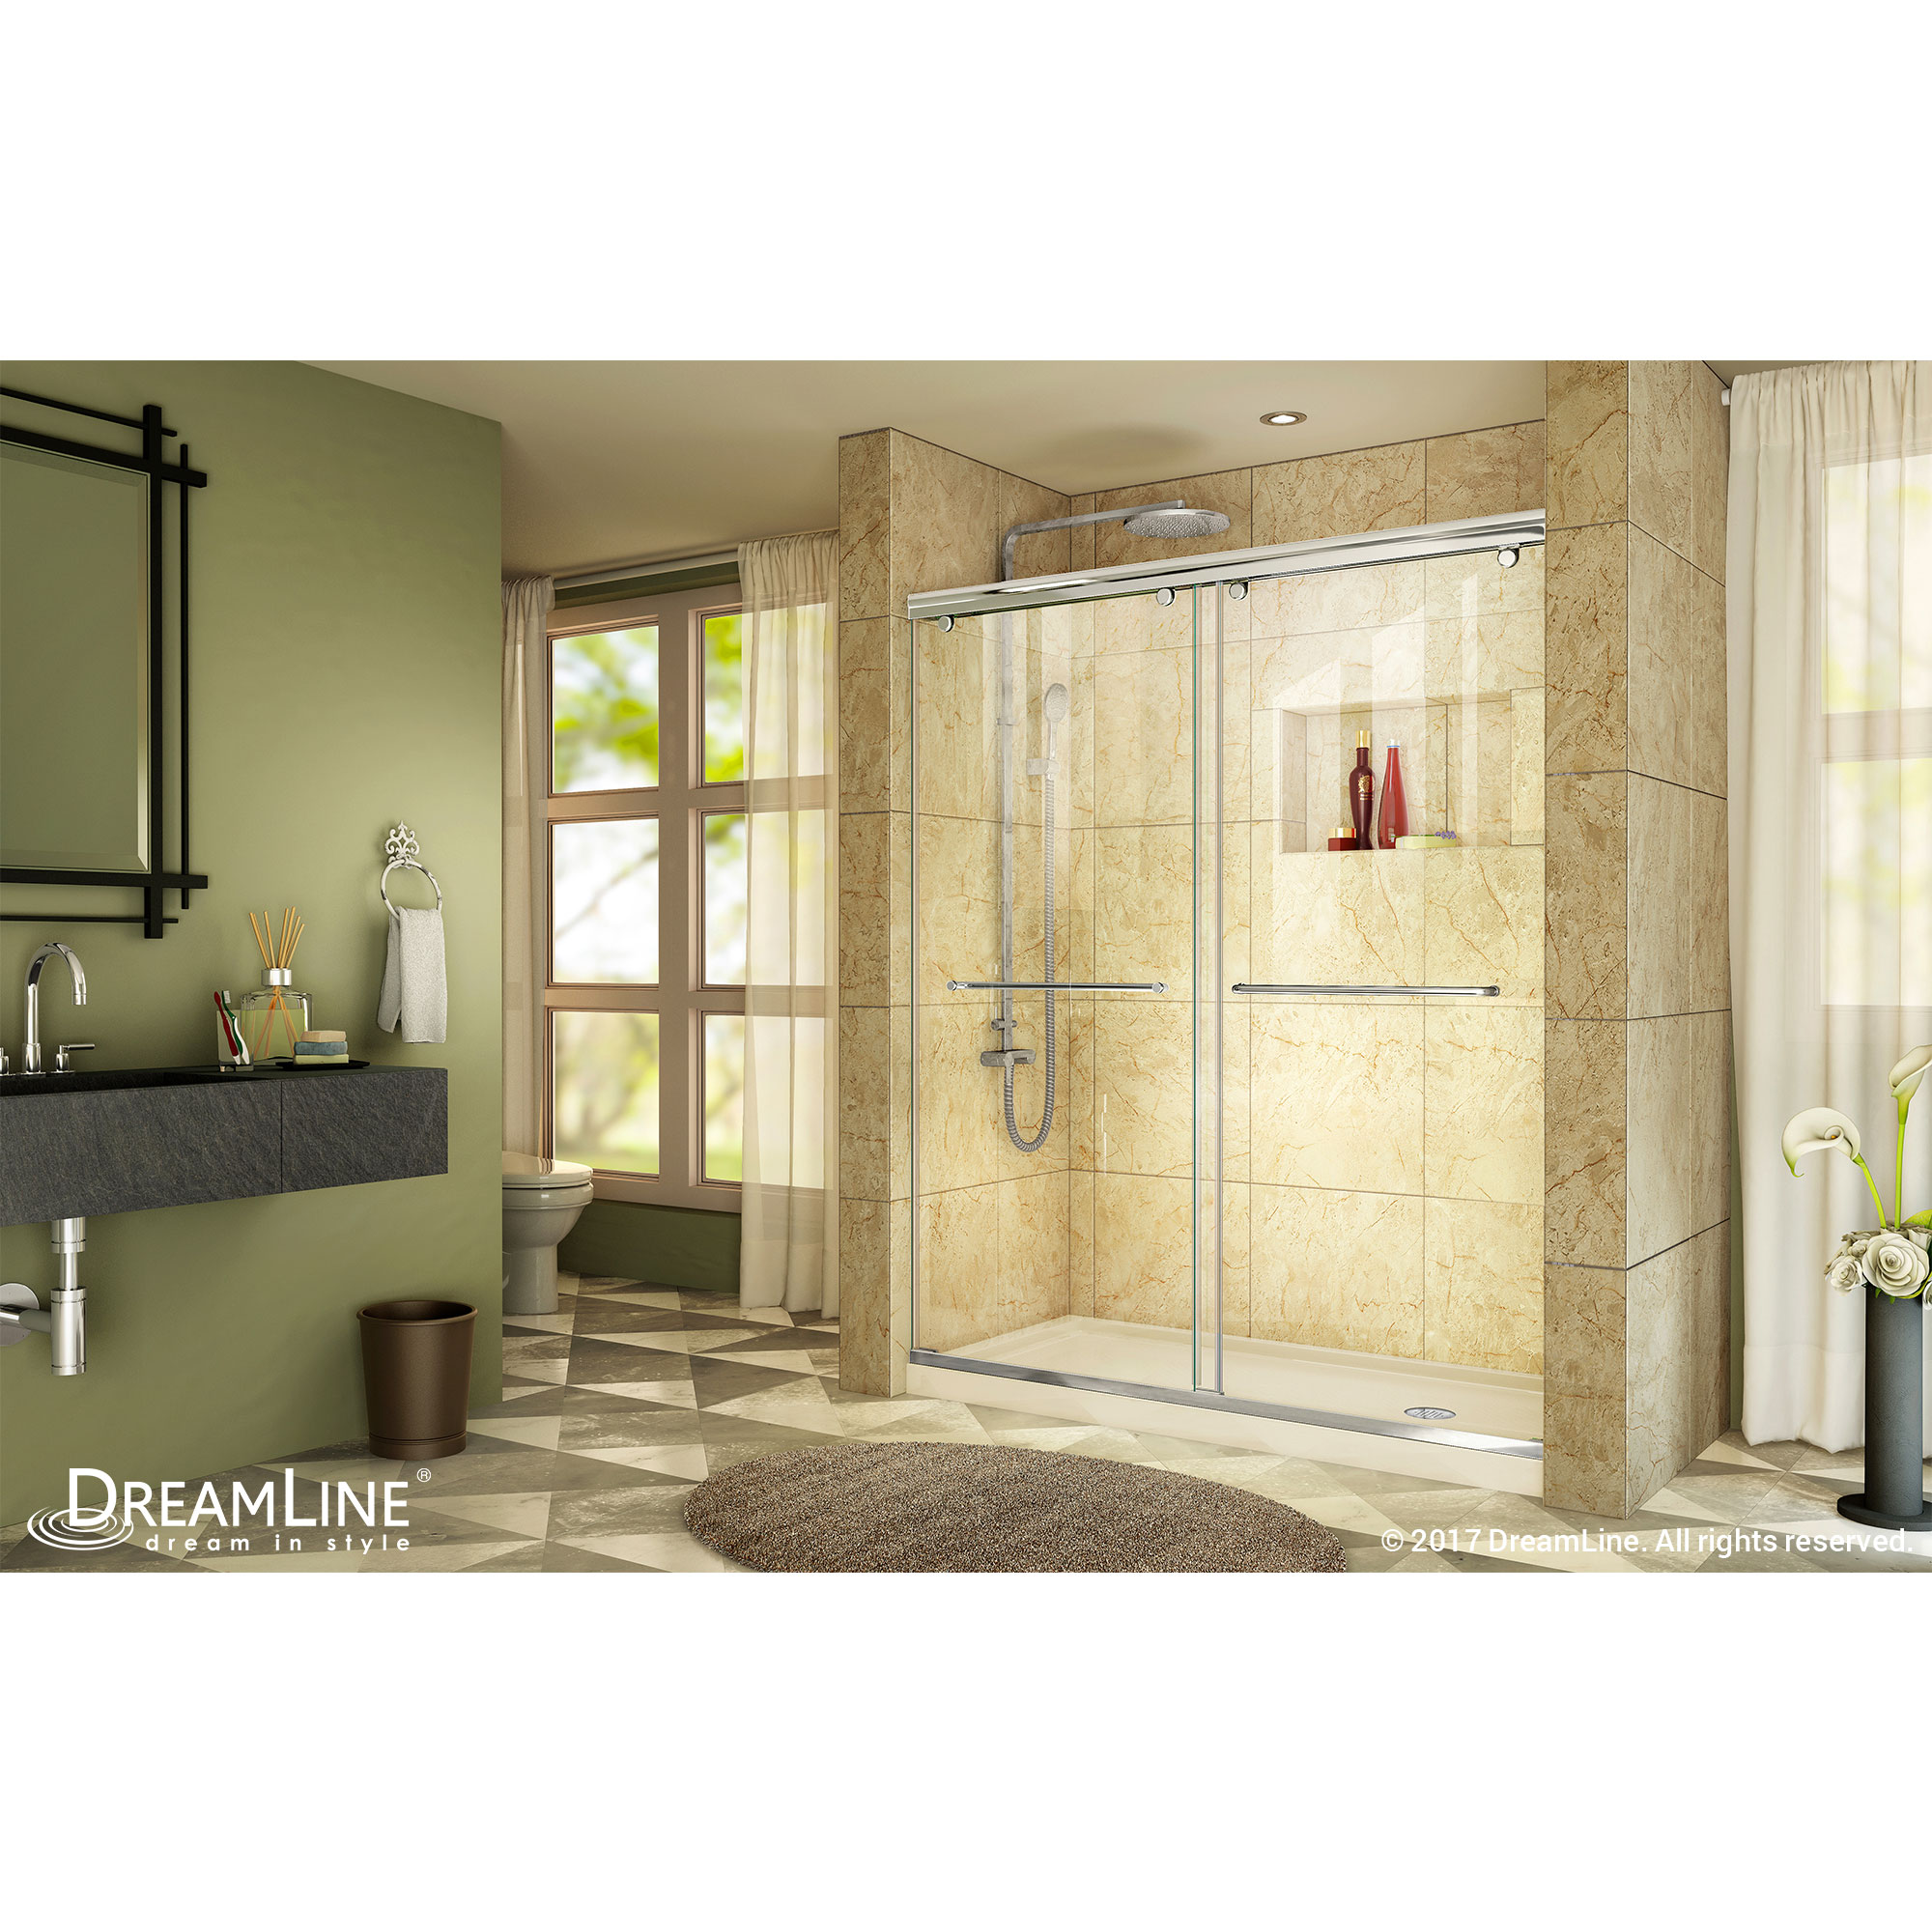 DreamLine Charisma 36 in. D x 60 in. W x 78 3/4 in. H Bypass Shower Door in Chrome with Right Drain Biscuit Base Kit